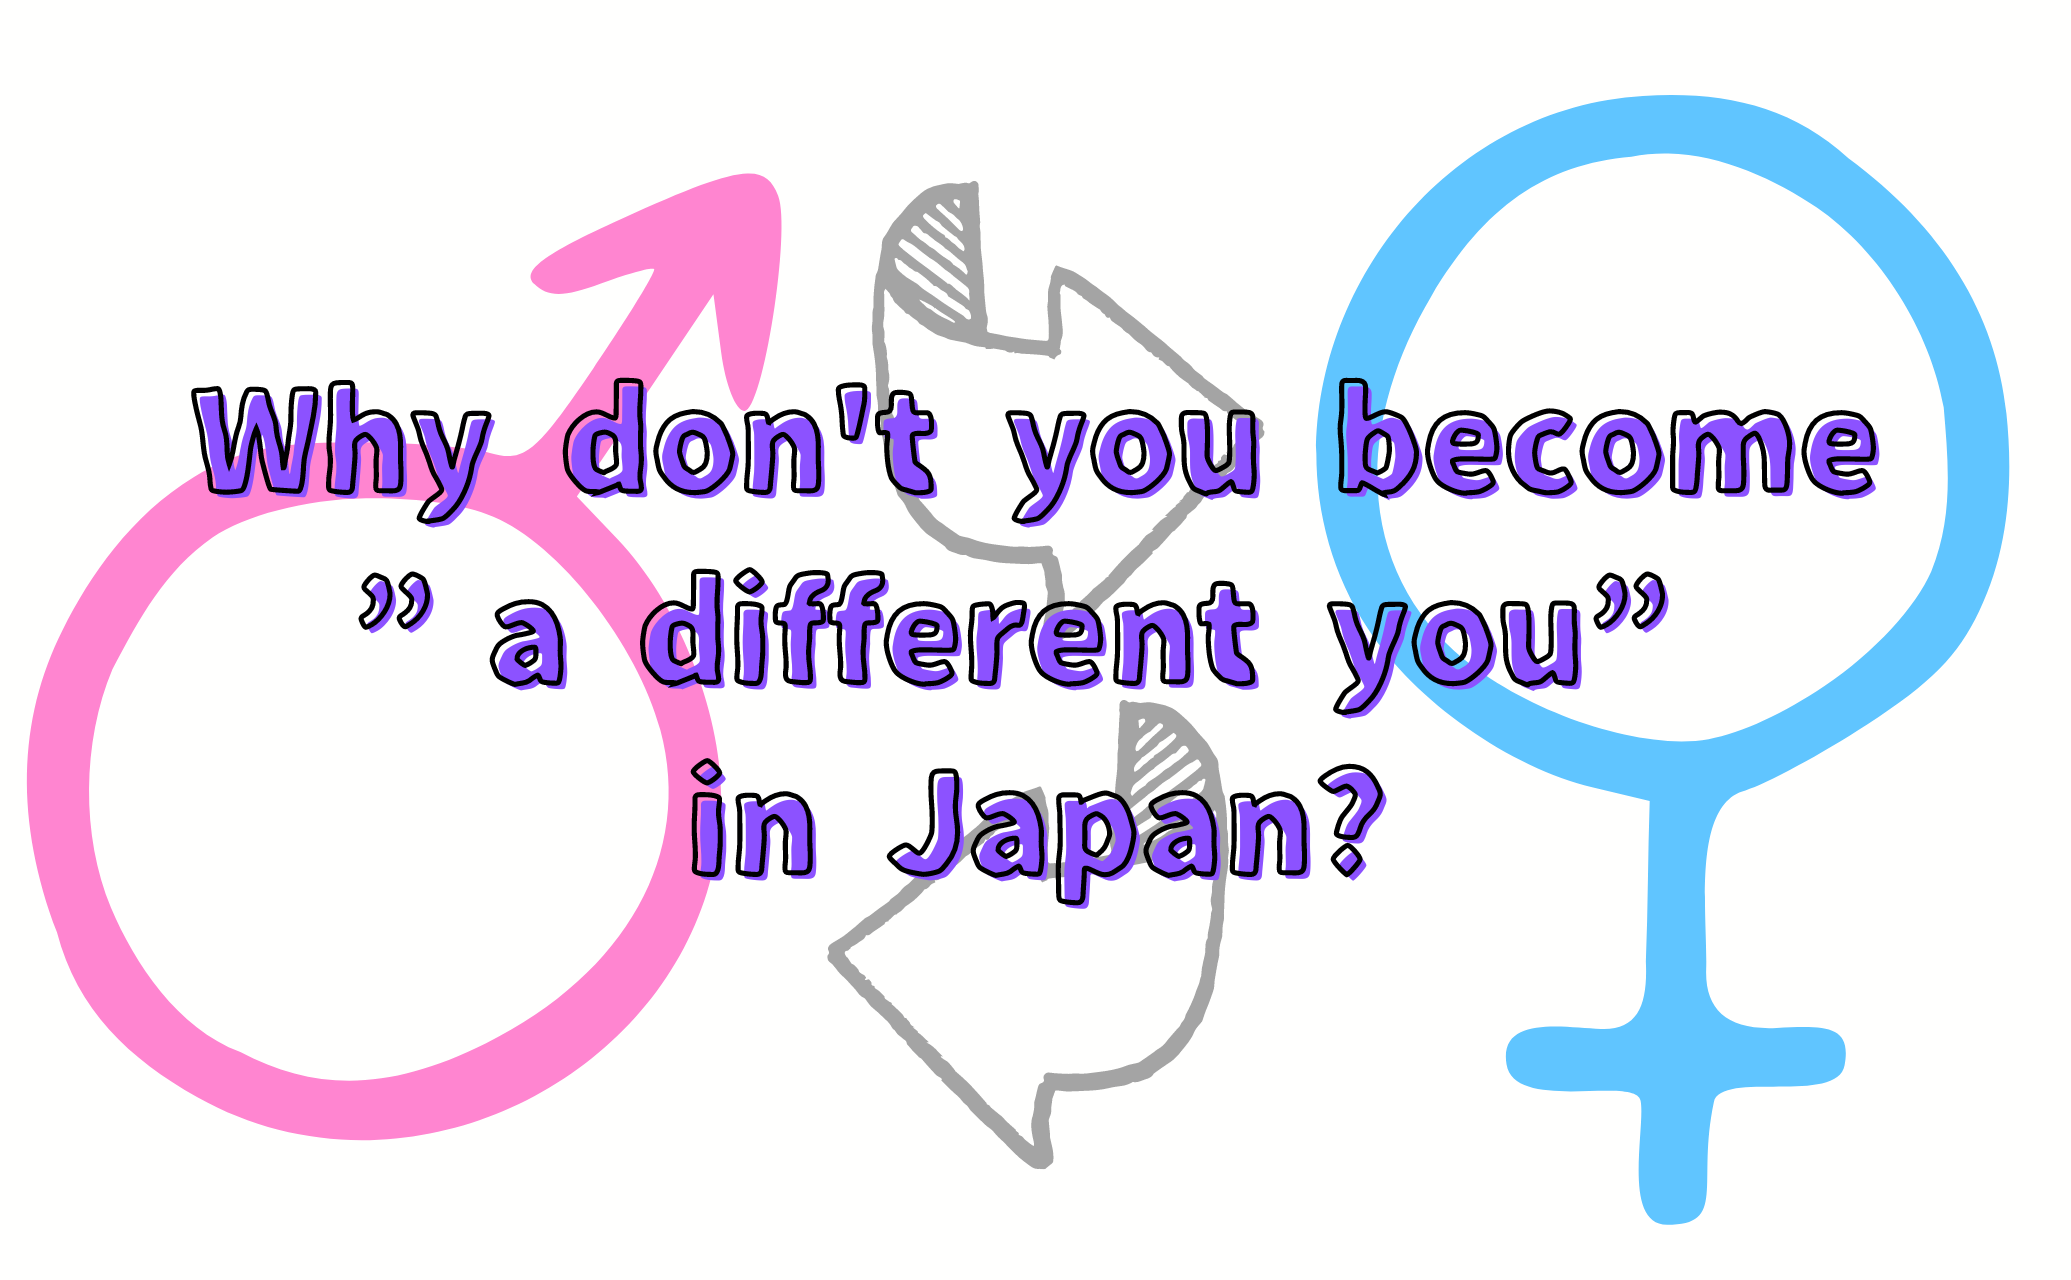 why don't you become a different you in Japan?